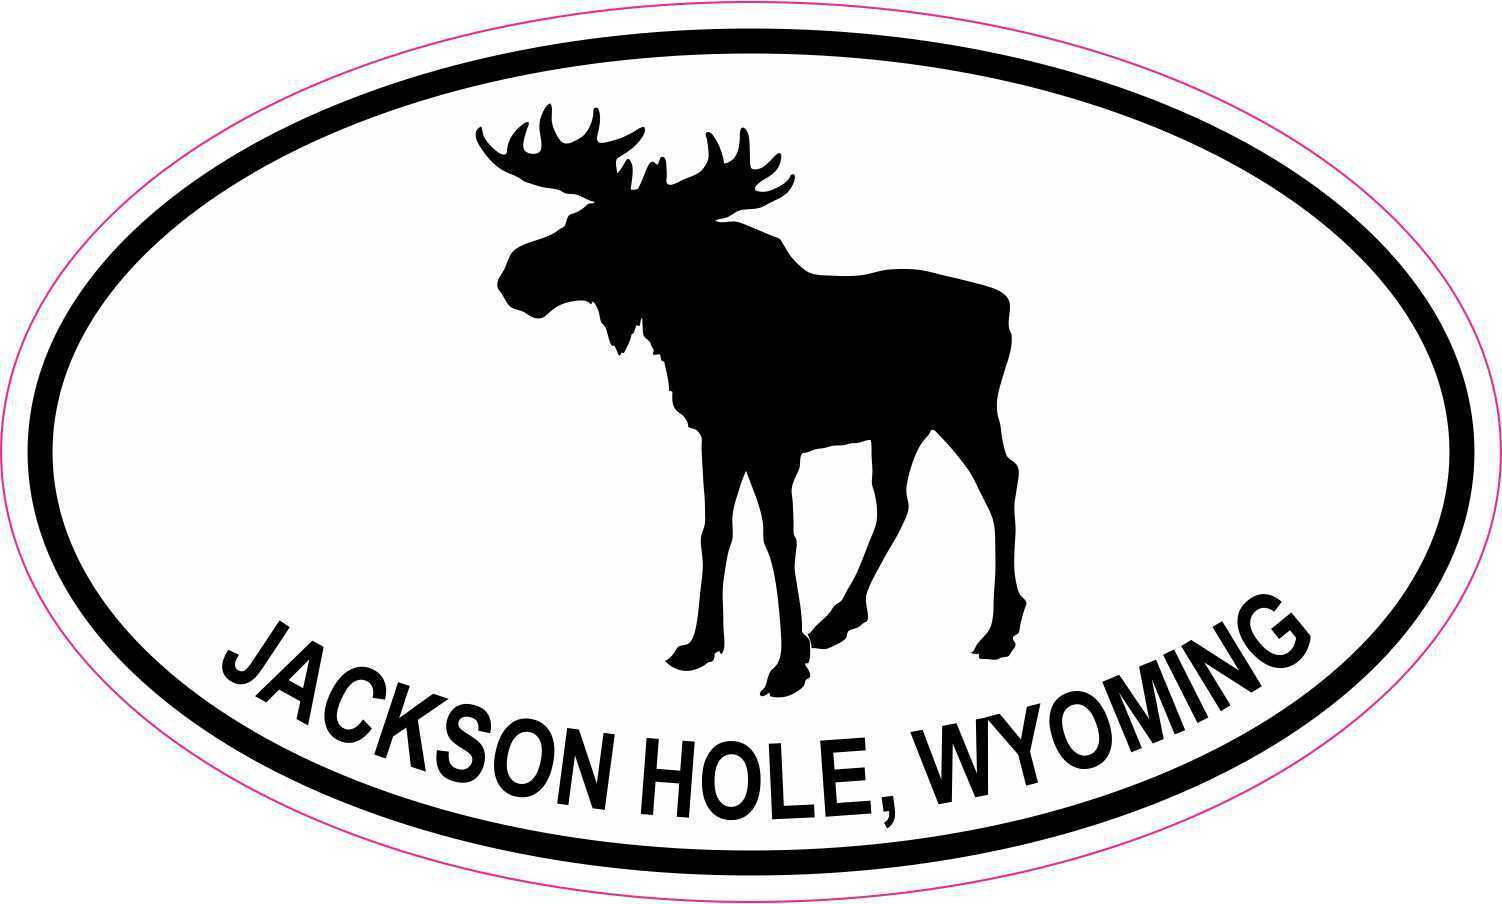 5in x 3in Moose Oval Jackson Hole Wyoming Vinyl Sticker Car Vehicle Bumper Decal